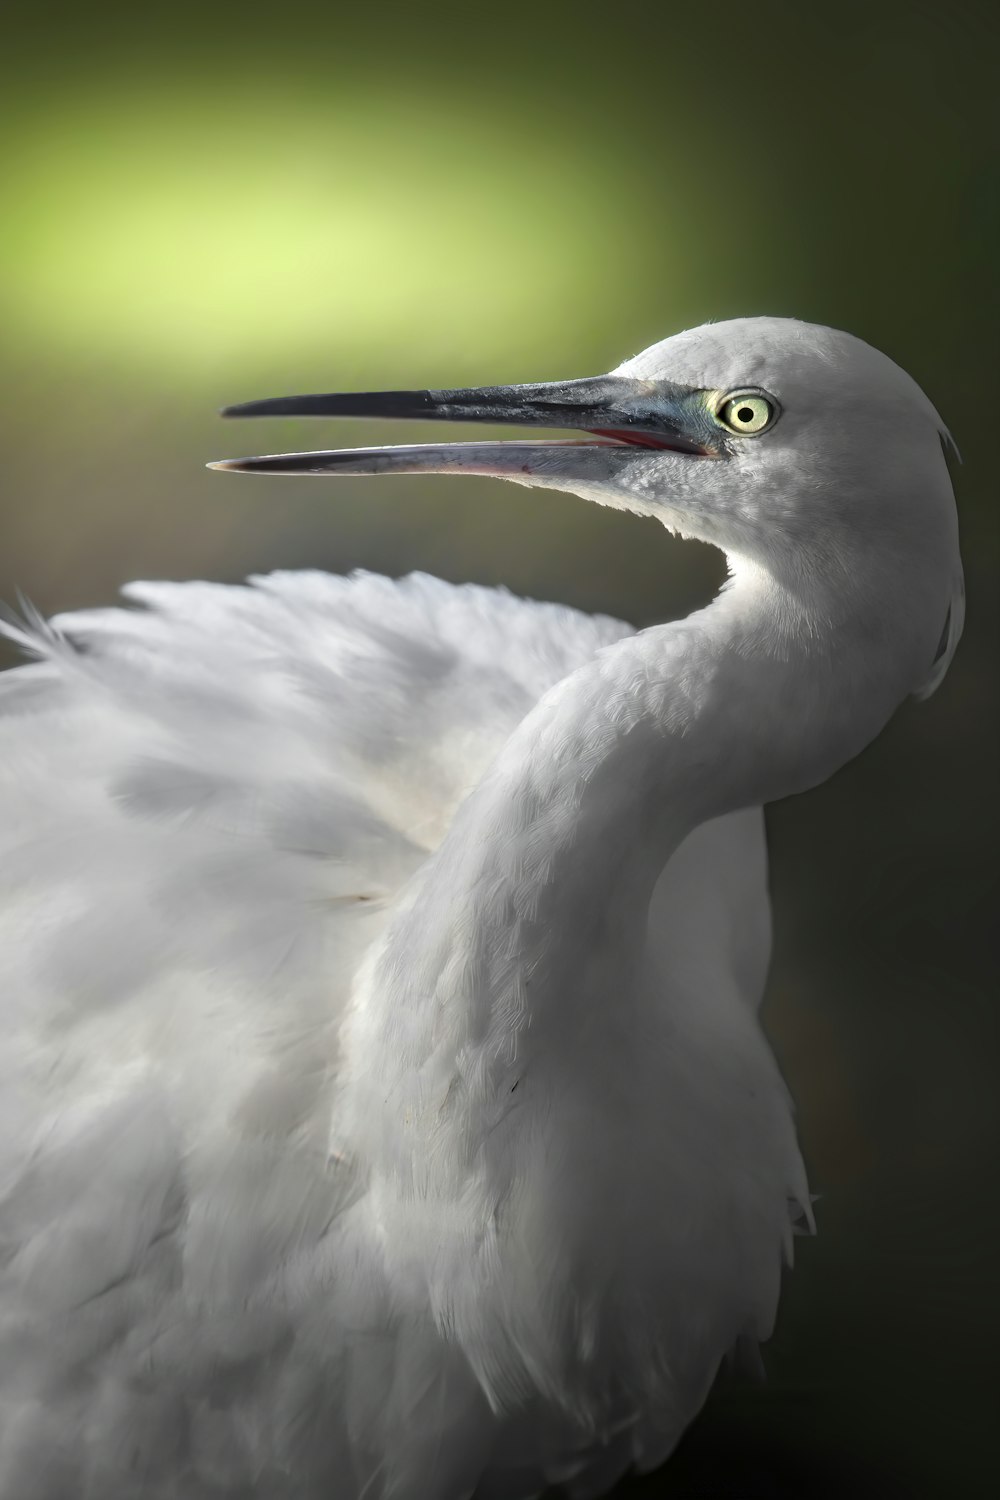 a close up of a white bird with a long beak